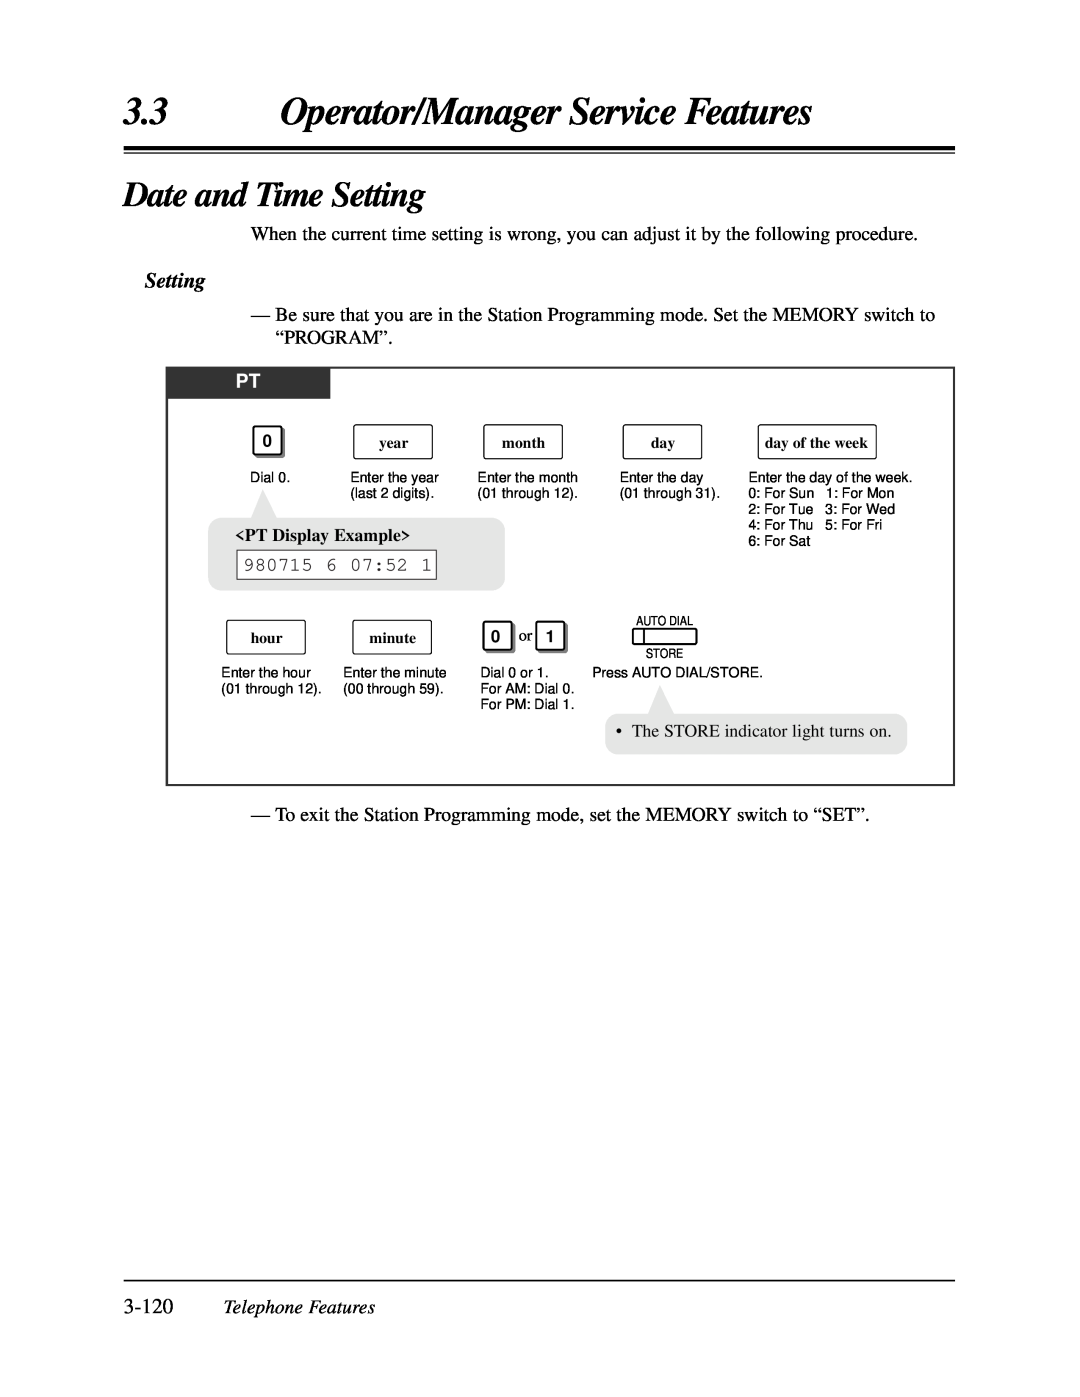 Panasonic KX-TA624 user manual Date and Time Setting, Operator/Manager Service Features, Telephone Features 